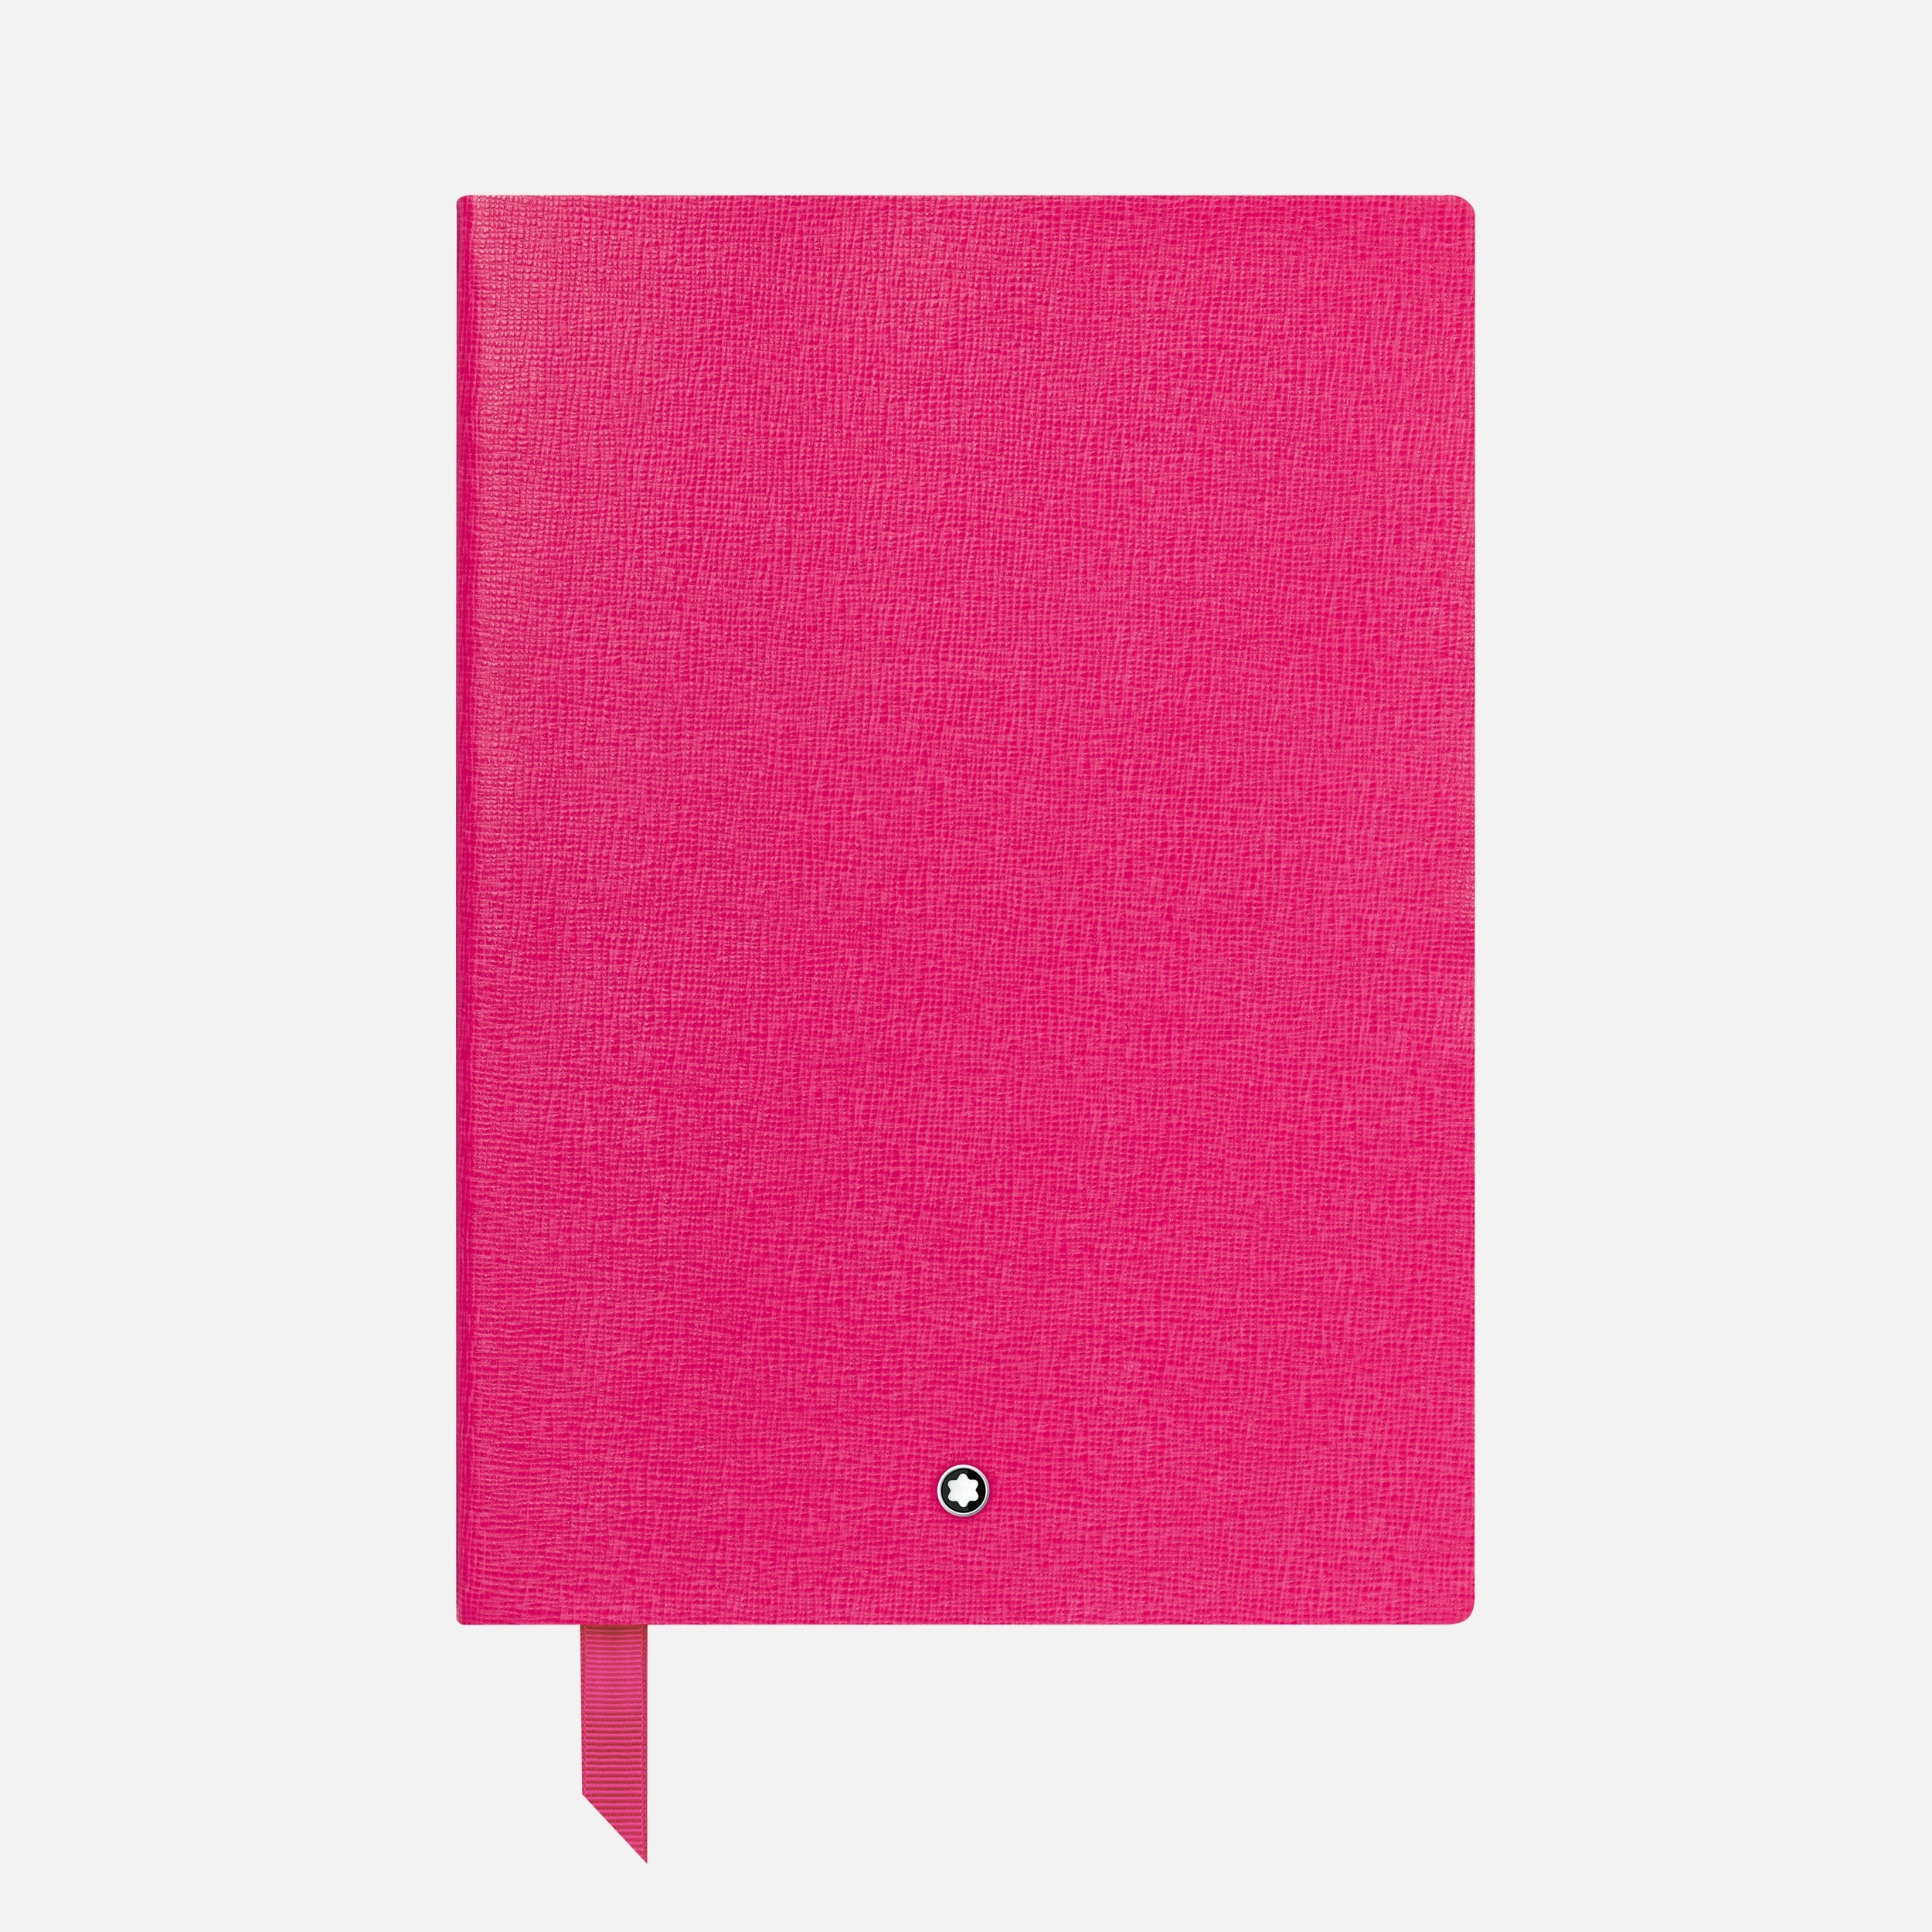 Montblanc Fine Stationery Notebook #146 Pink, Lined - 1